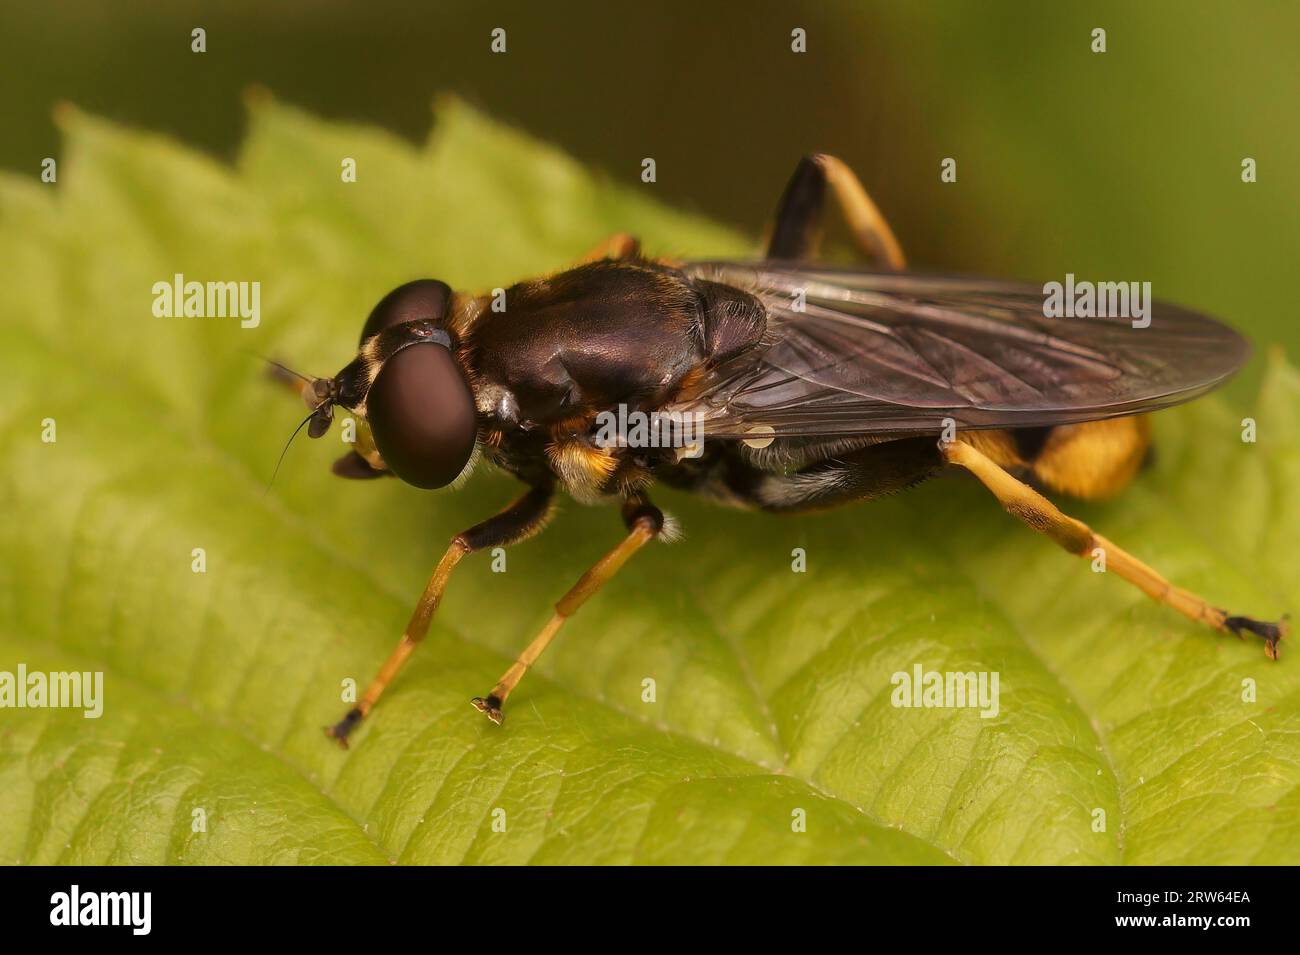 Natural closeup on a golden-tailed leafwalker hoverfly, Xylota sylvarum sitting on a green leaf in the forest Stock Photo